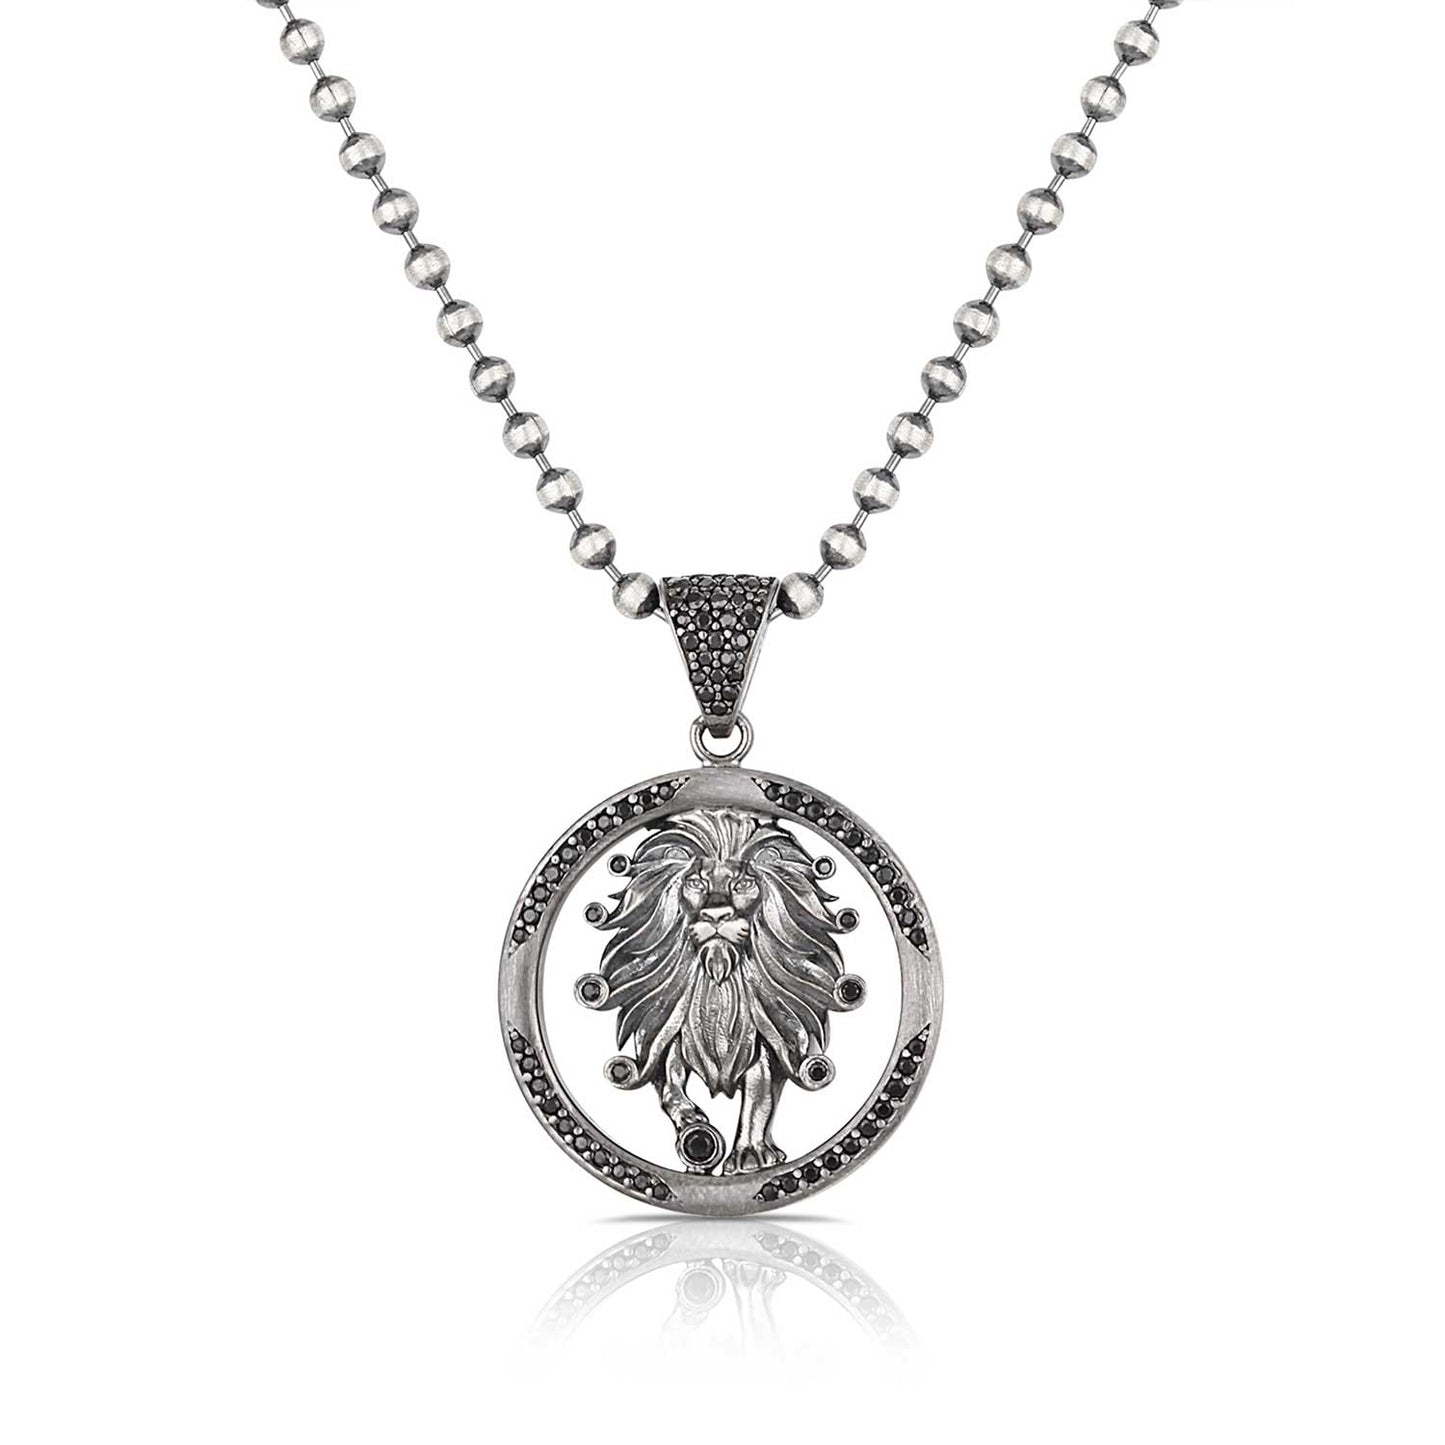 RARE PRINCE by CARAT SUTRA | Unique Leo Zodiac Designed Pendant Studded with Black Zircons | Unisex 925 Sterling Silver Oxidized Pendant | Men's Jewelry | With Certificate of Authenticity and 925 Hallmark - caratsutra